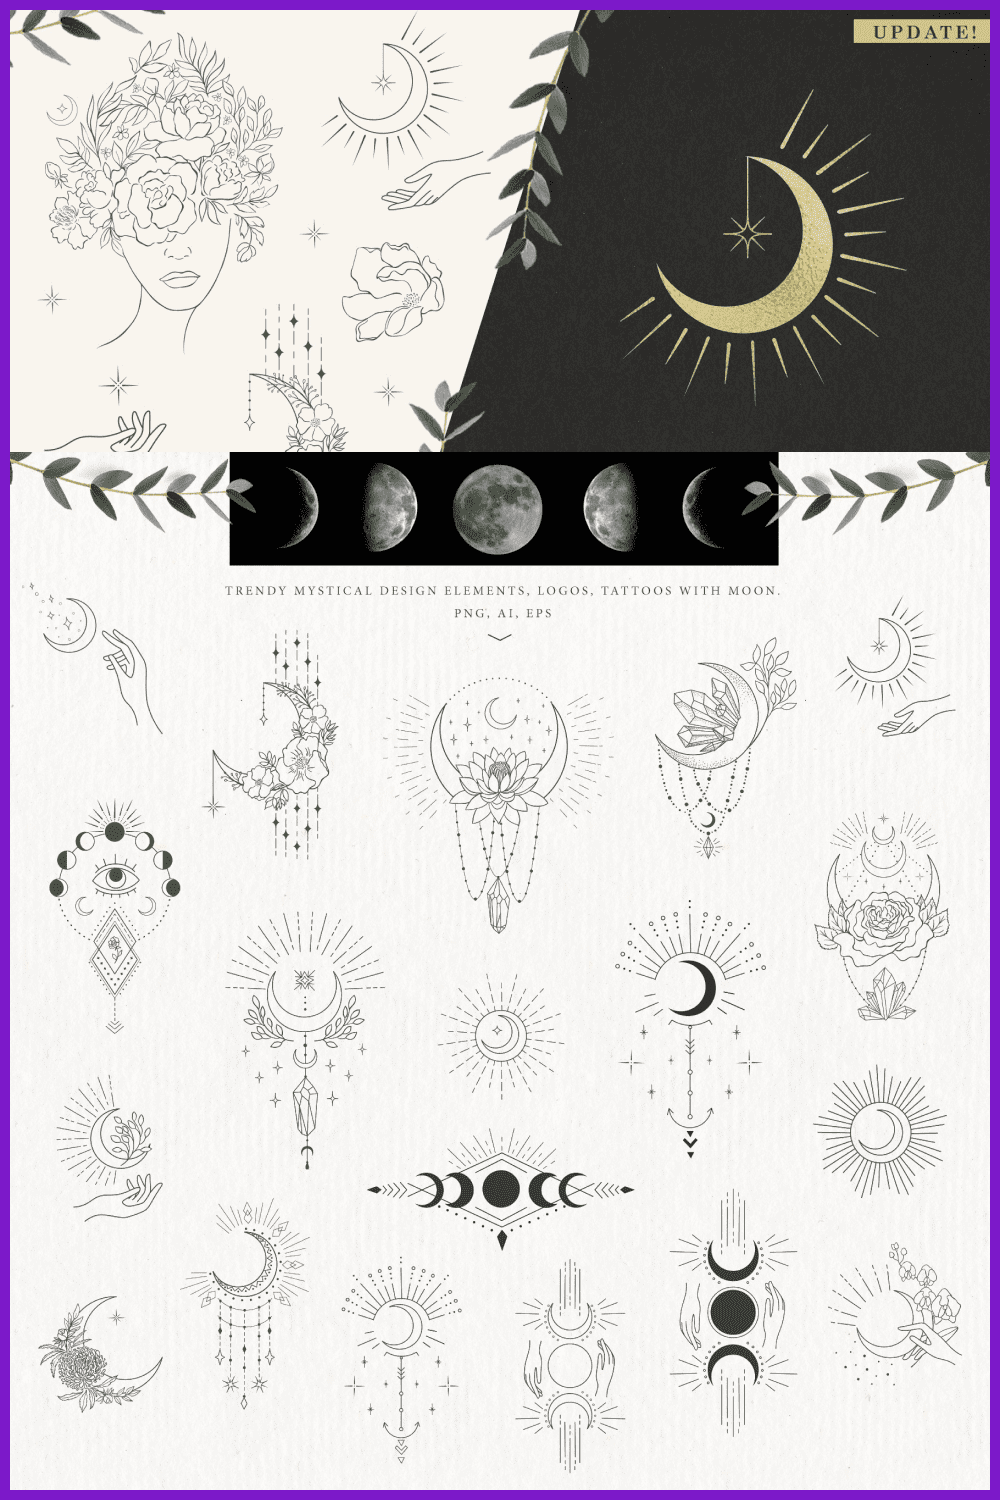 Collage of images of the moon in variations of combinations with stars.